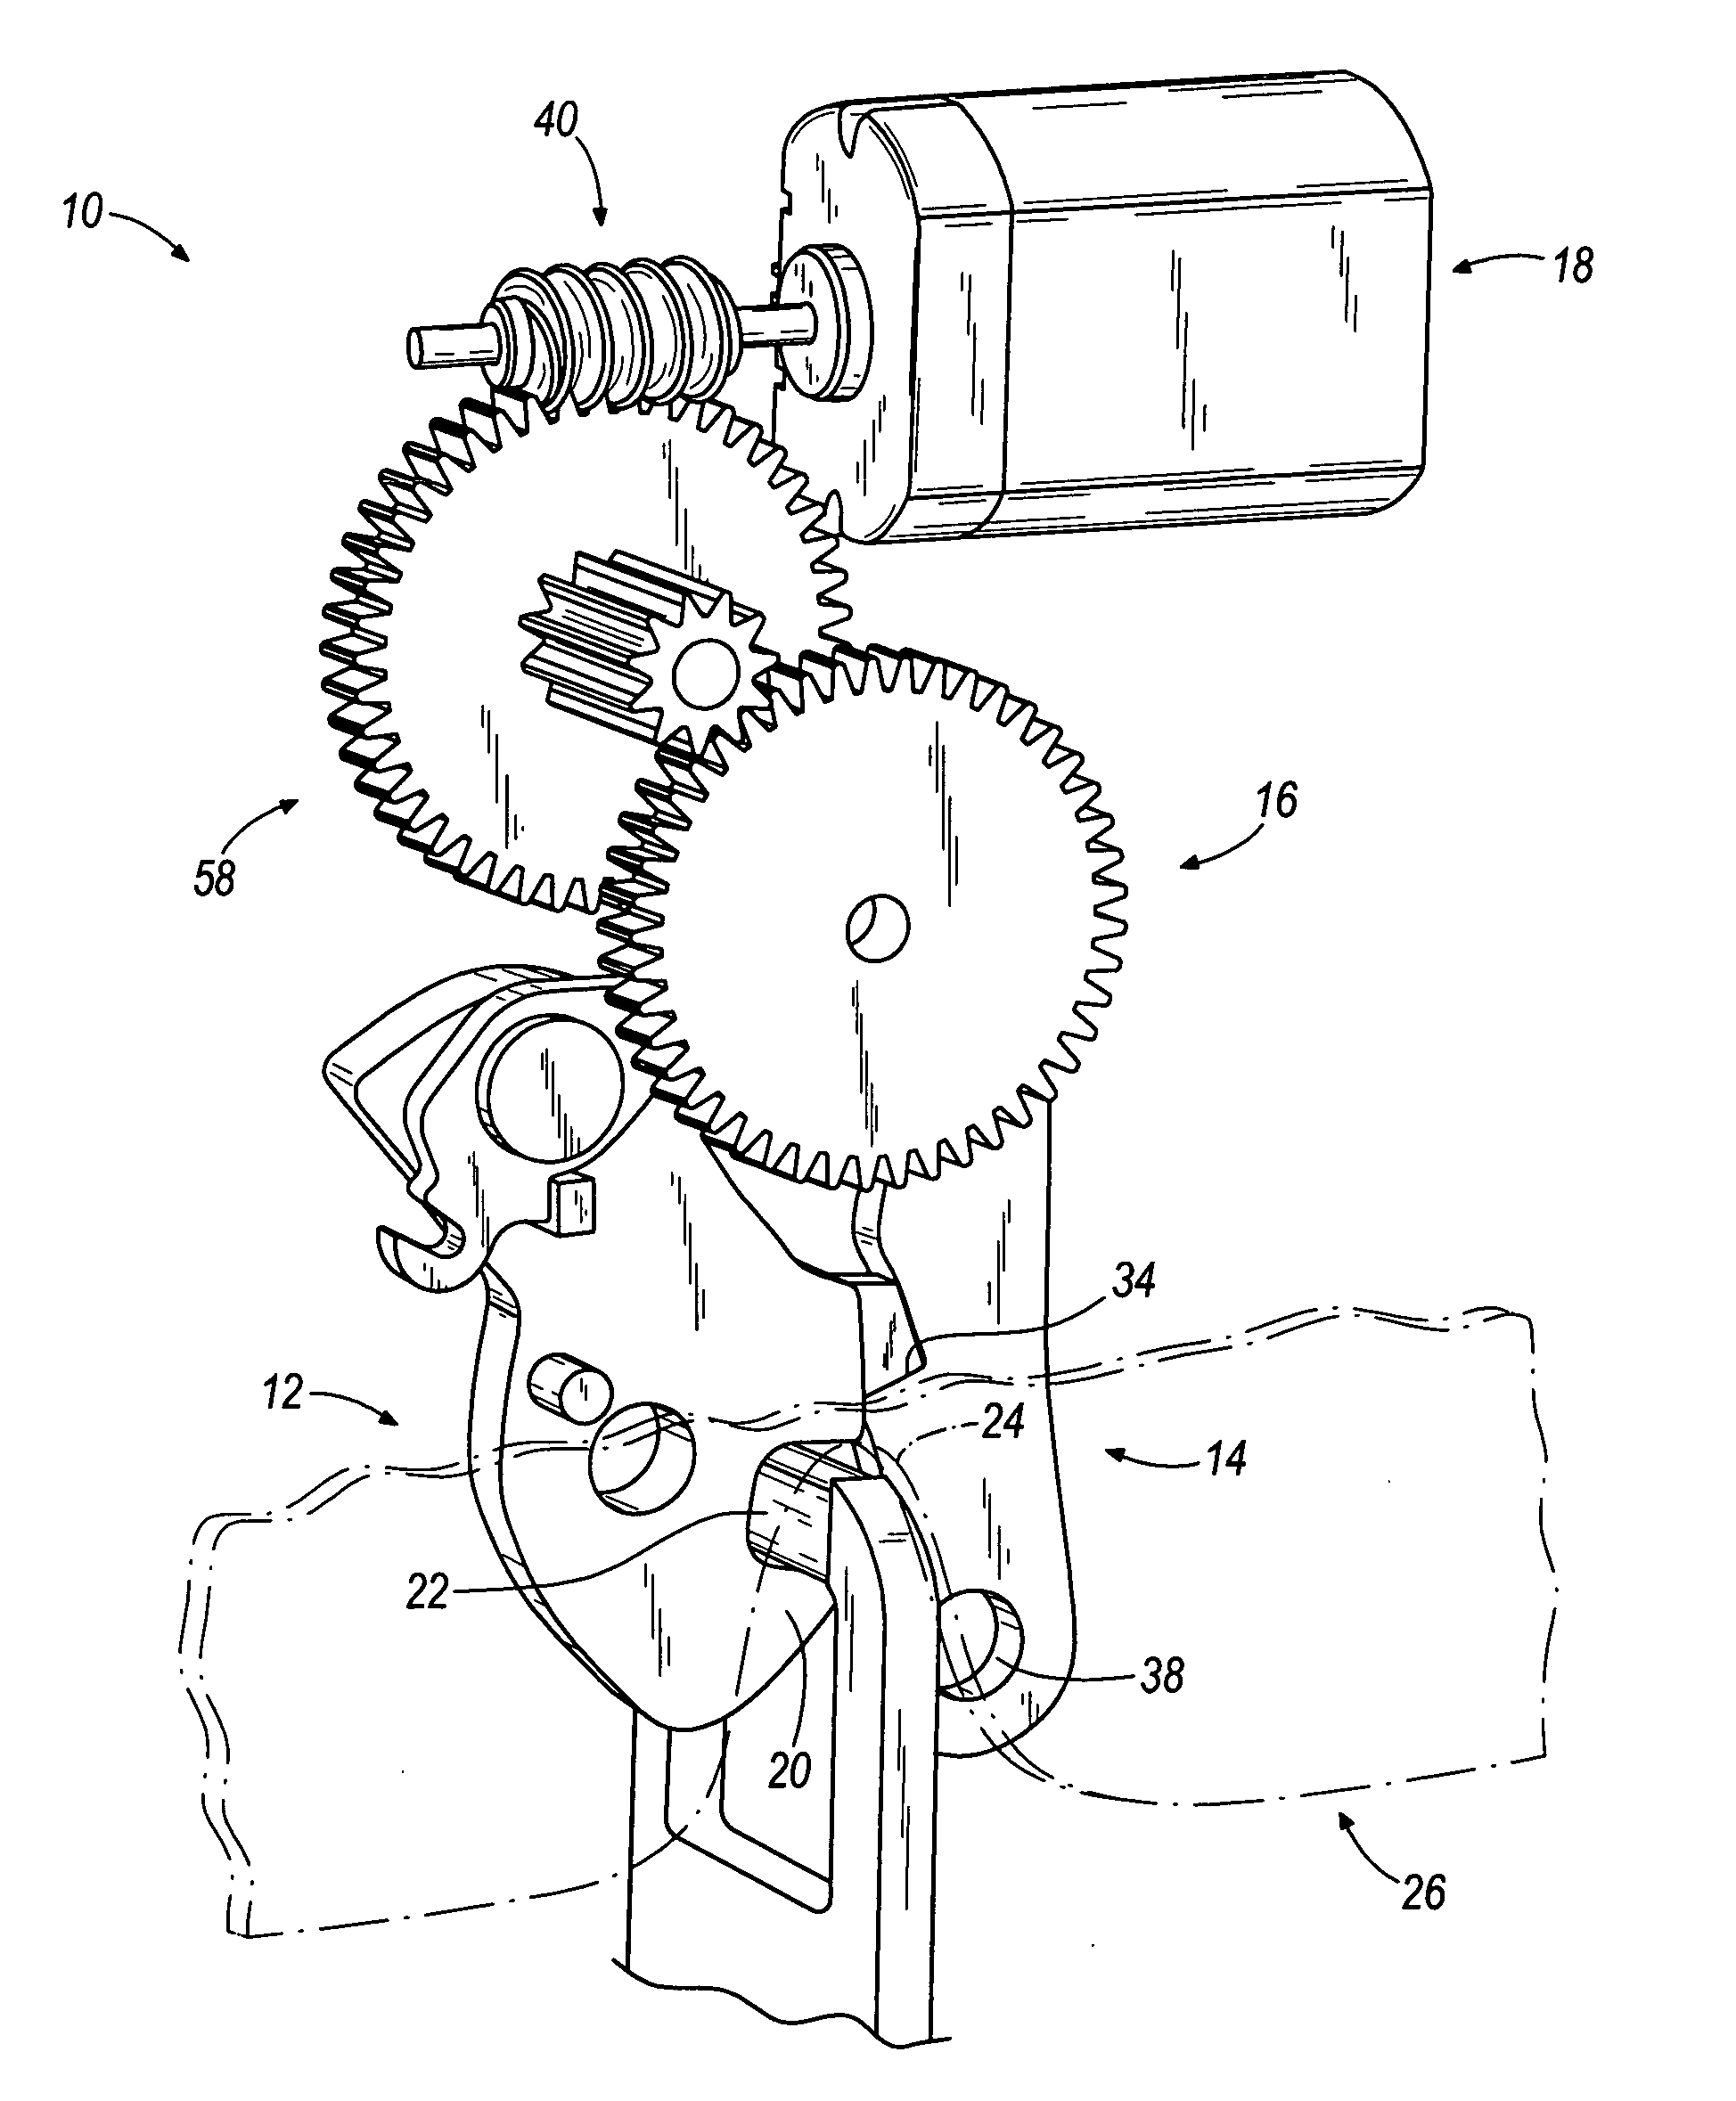 Latch apparatus and method